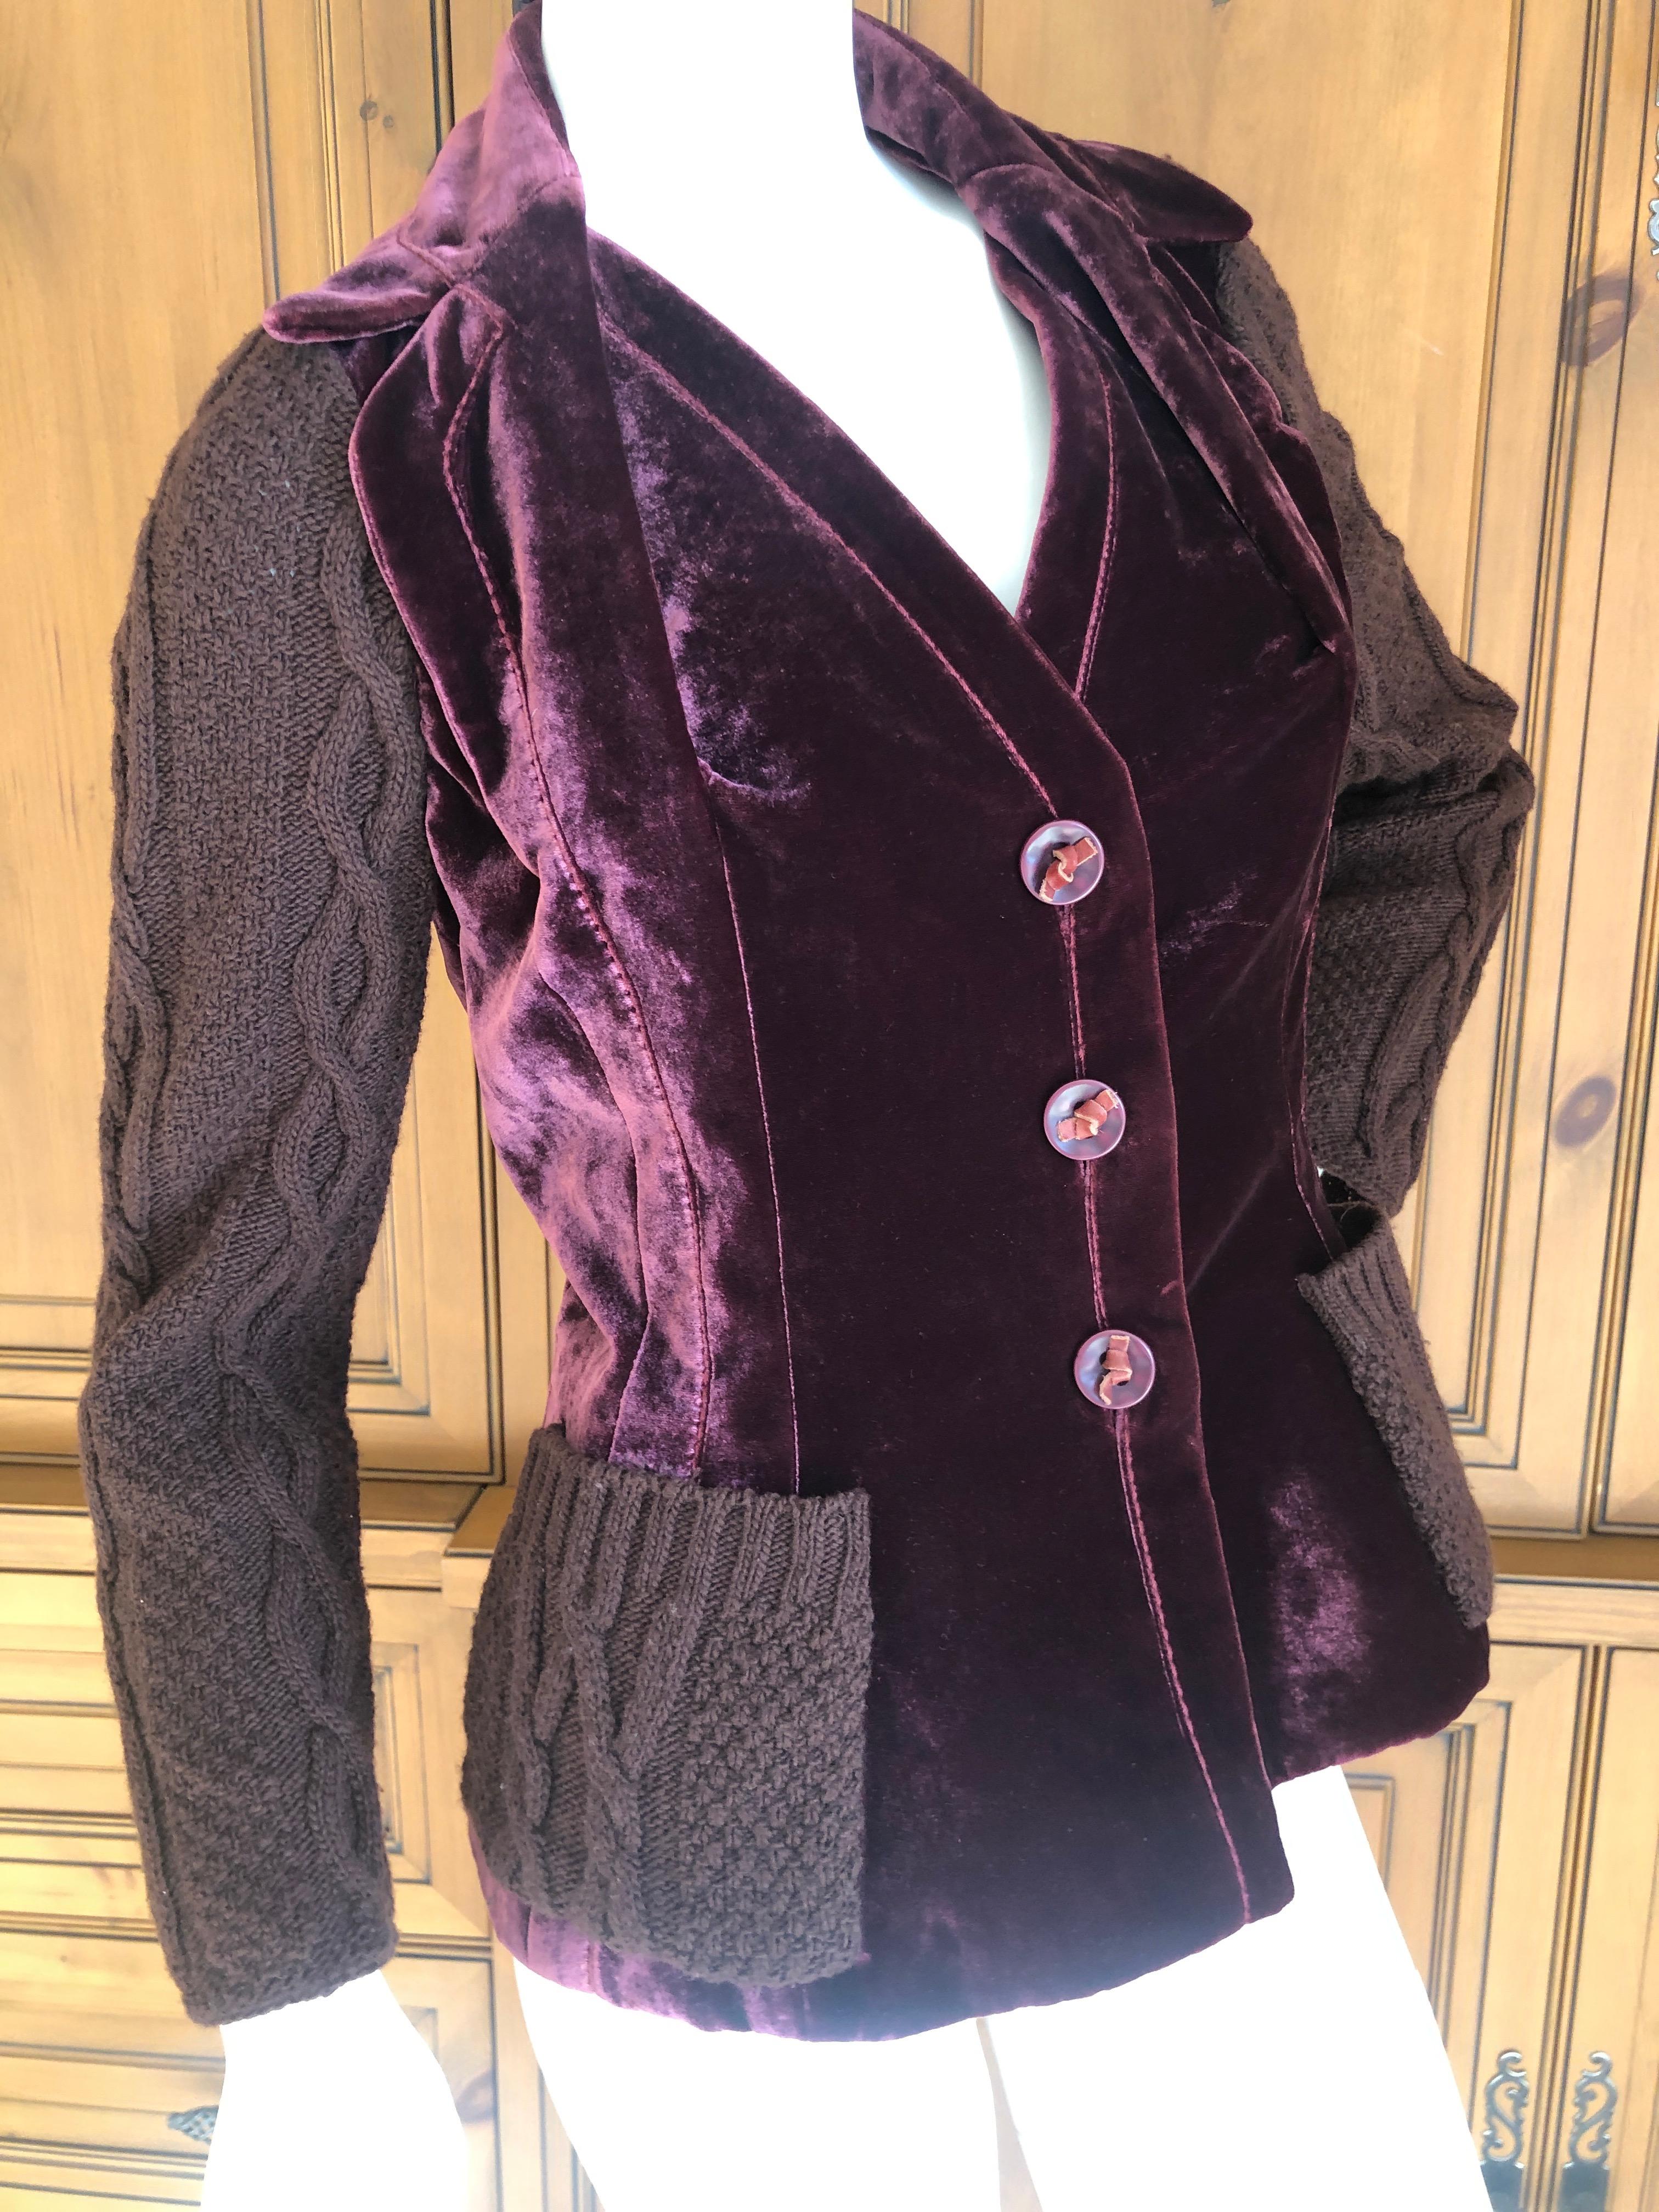 Christian Dior by John Galliano Burgundy Velvet Bar Jacket w Cable Knit Details For Sale 3